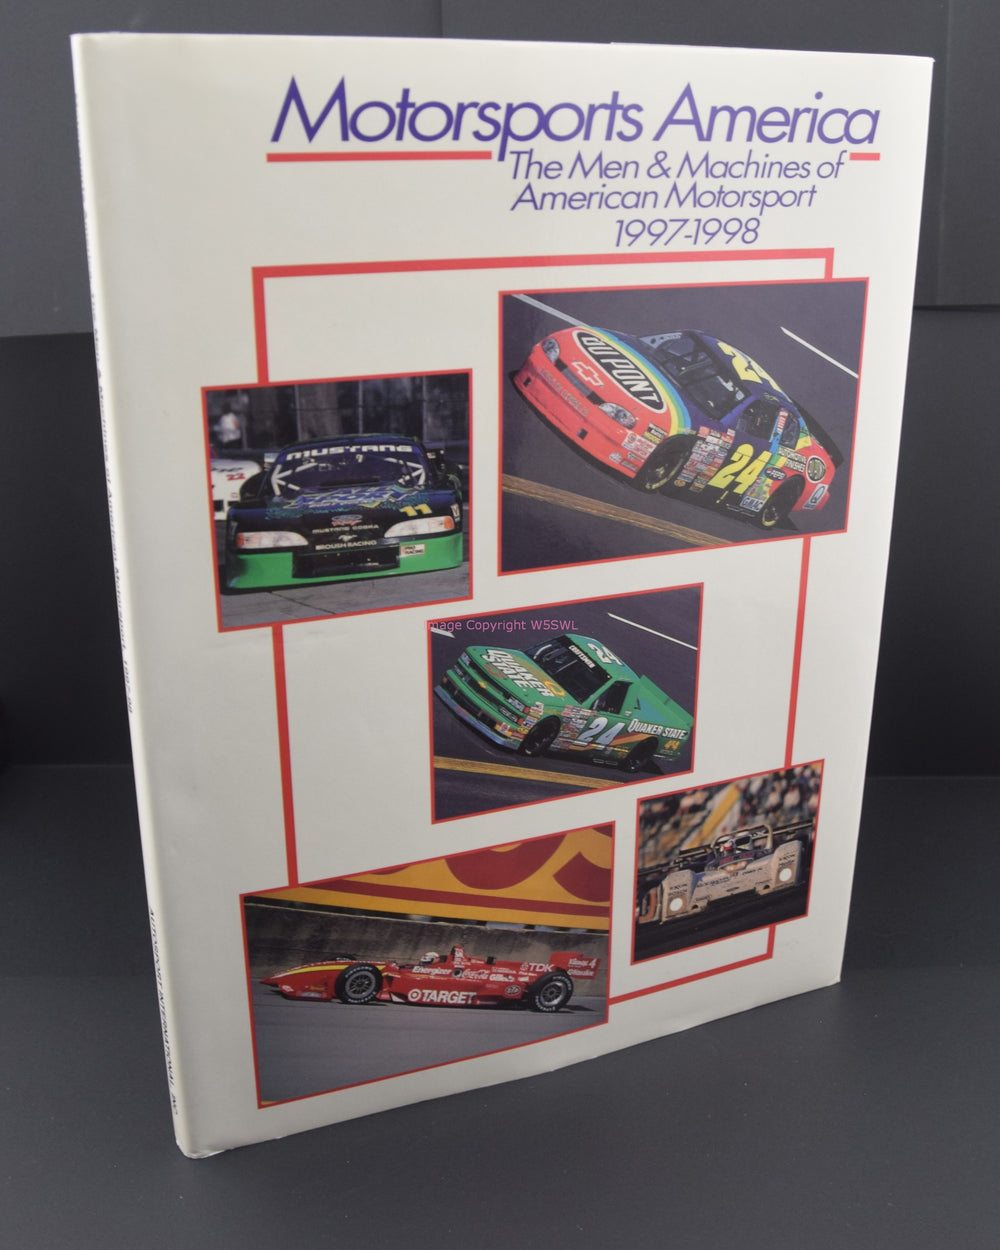 Motorsports America 1997 - 1998 Men and Machines of American Motorsports - Dave's Hobby Shop by W5SWL